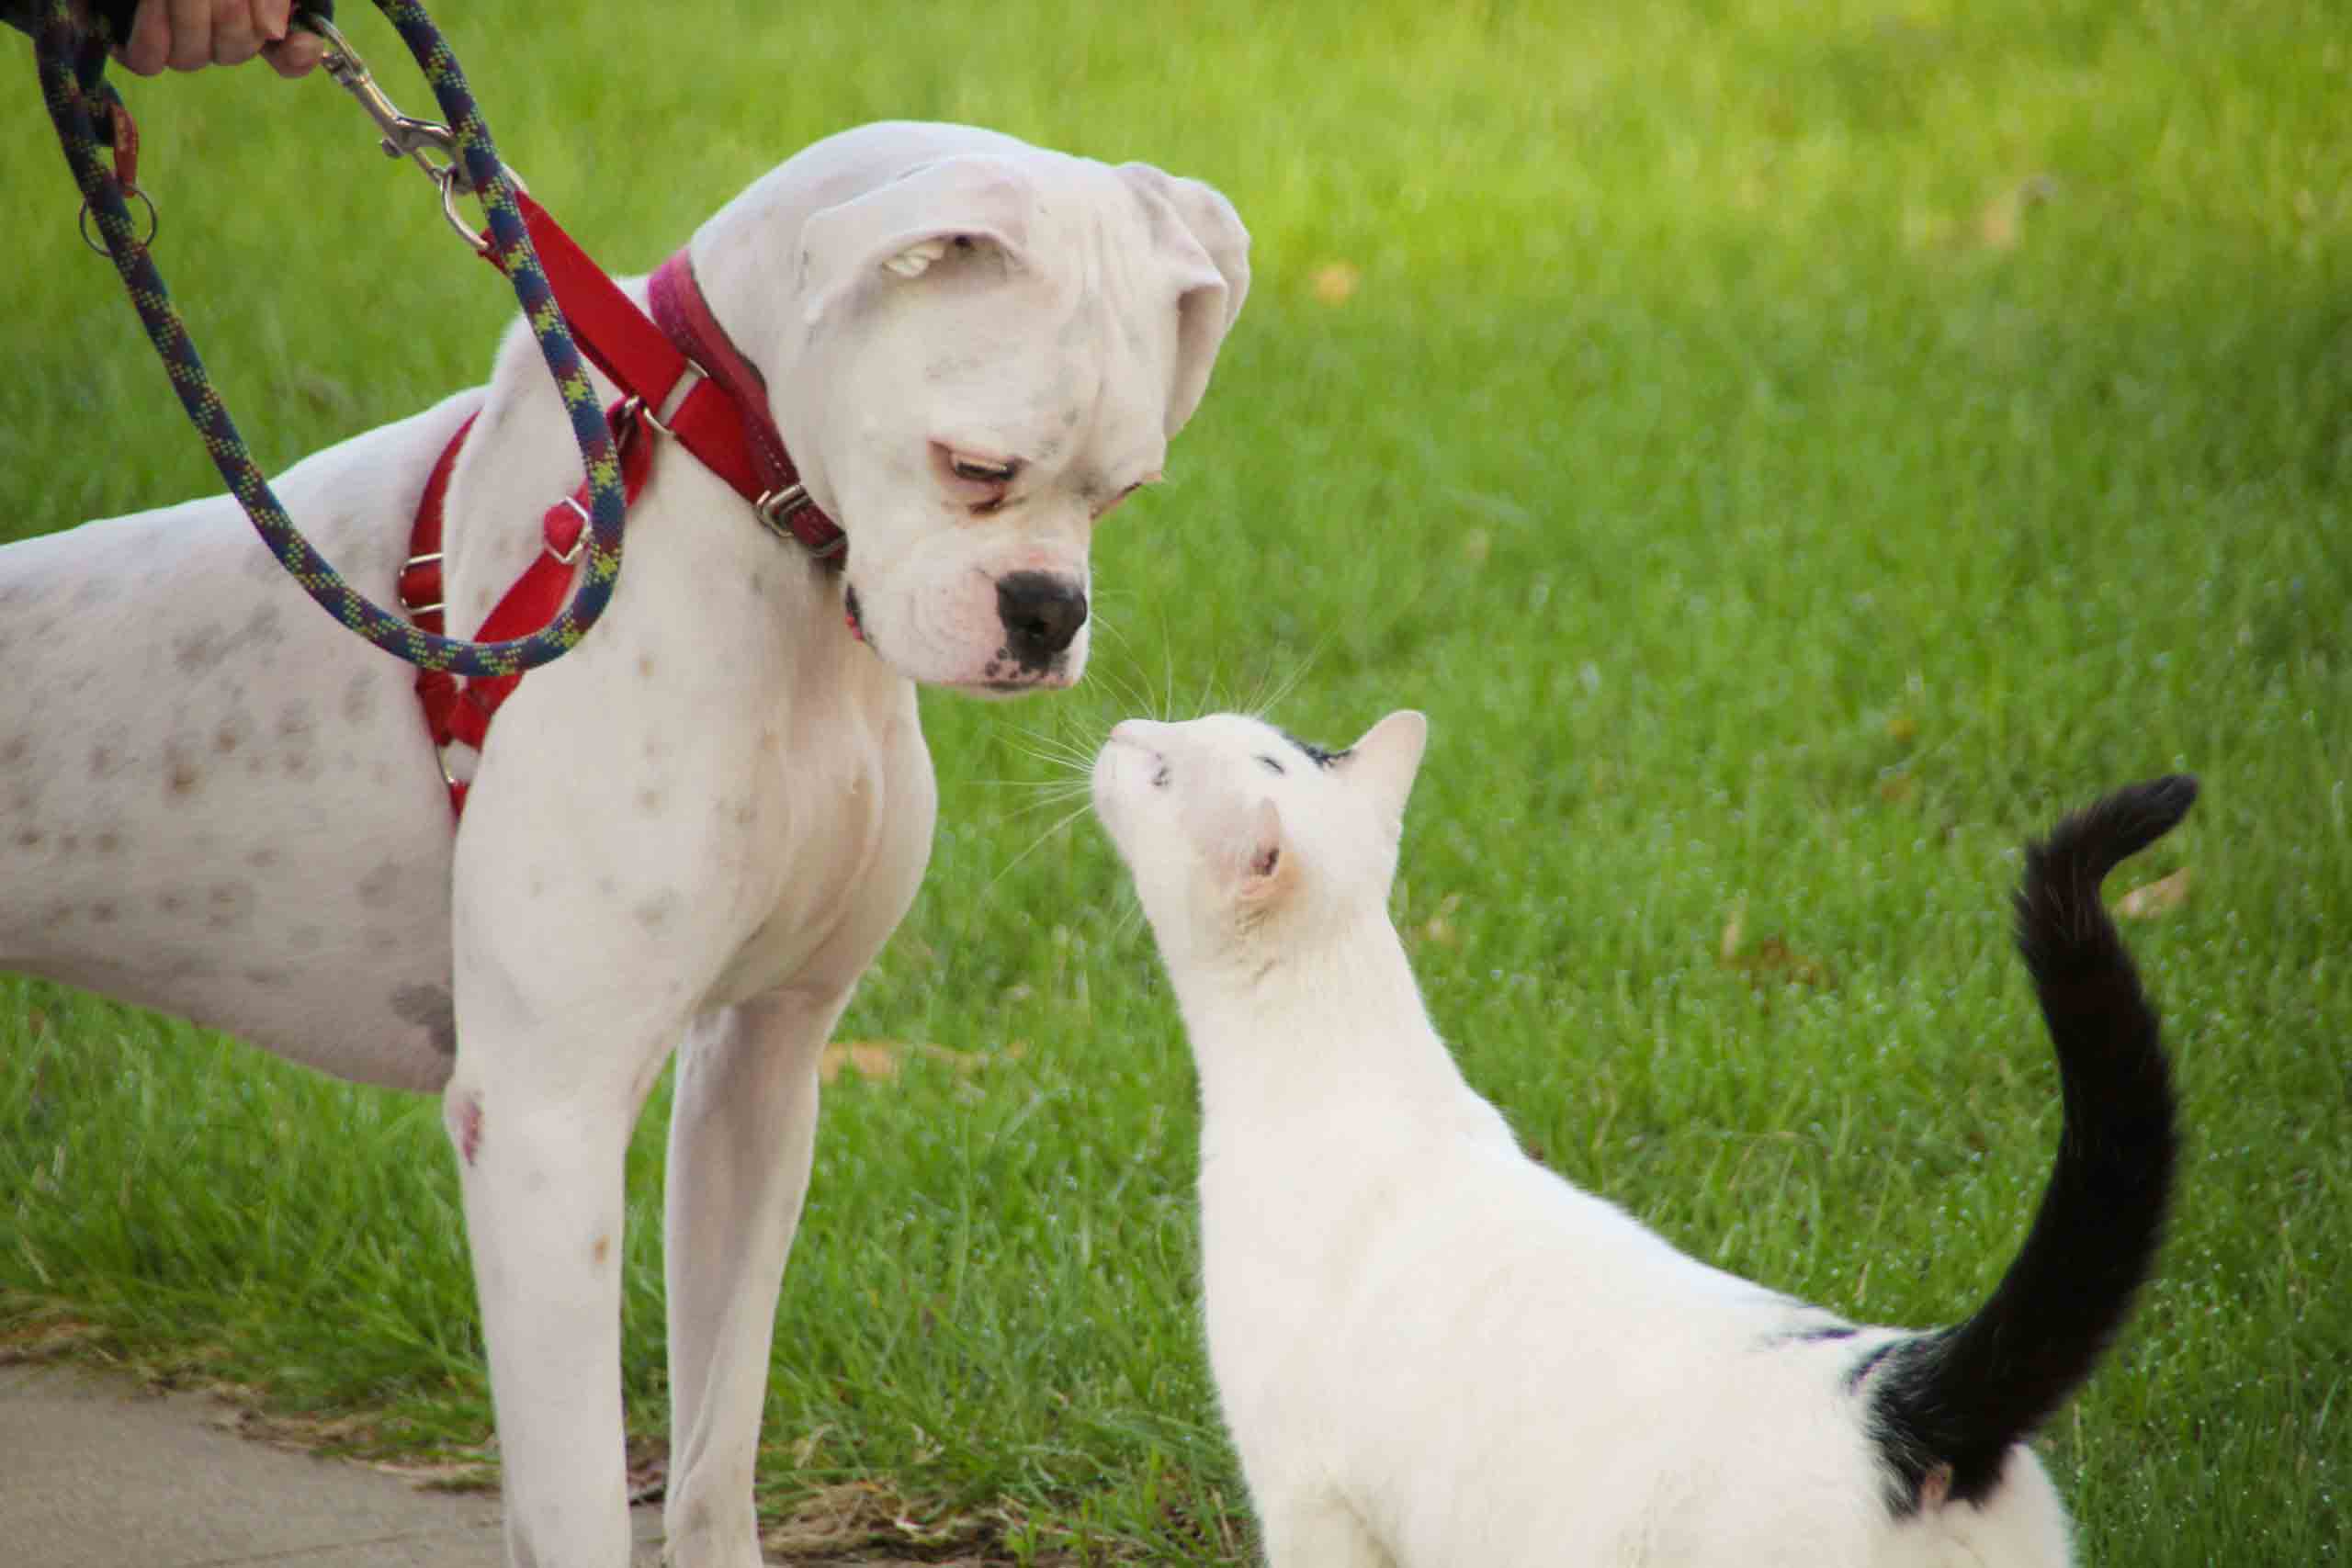 leashed dog interacting with cat